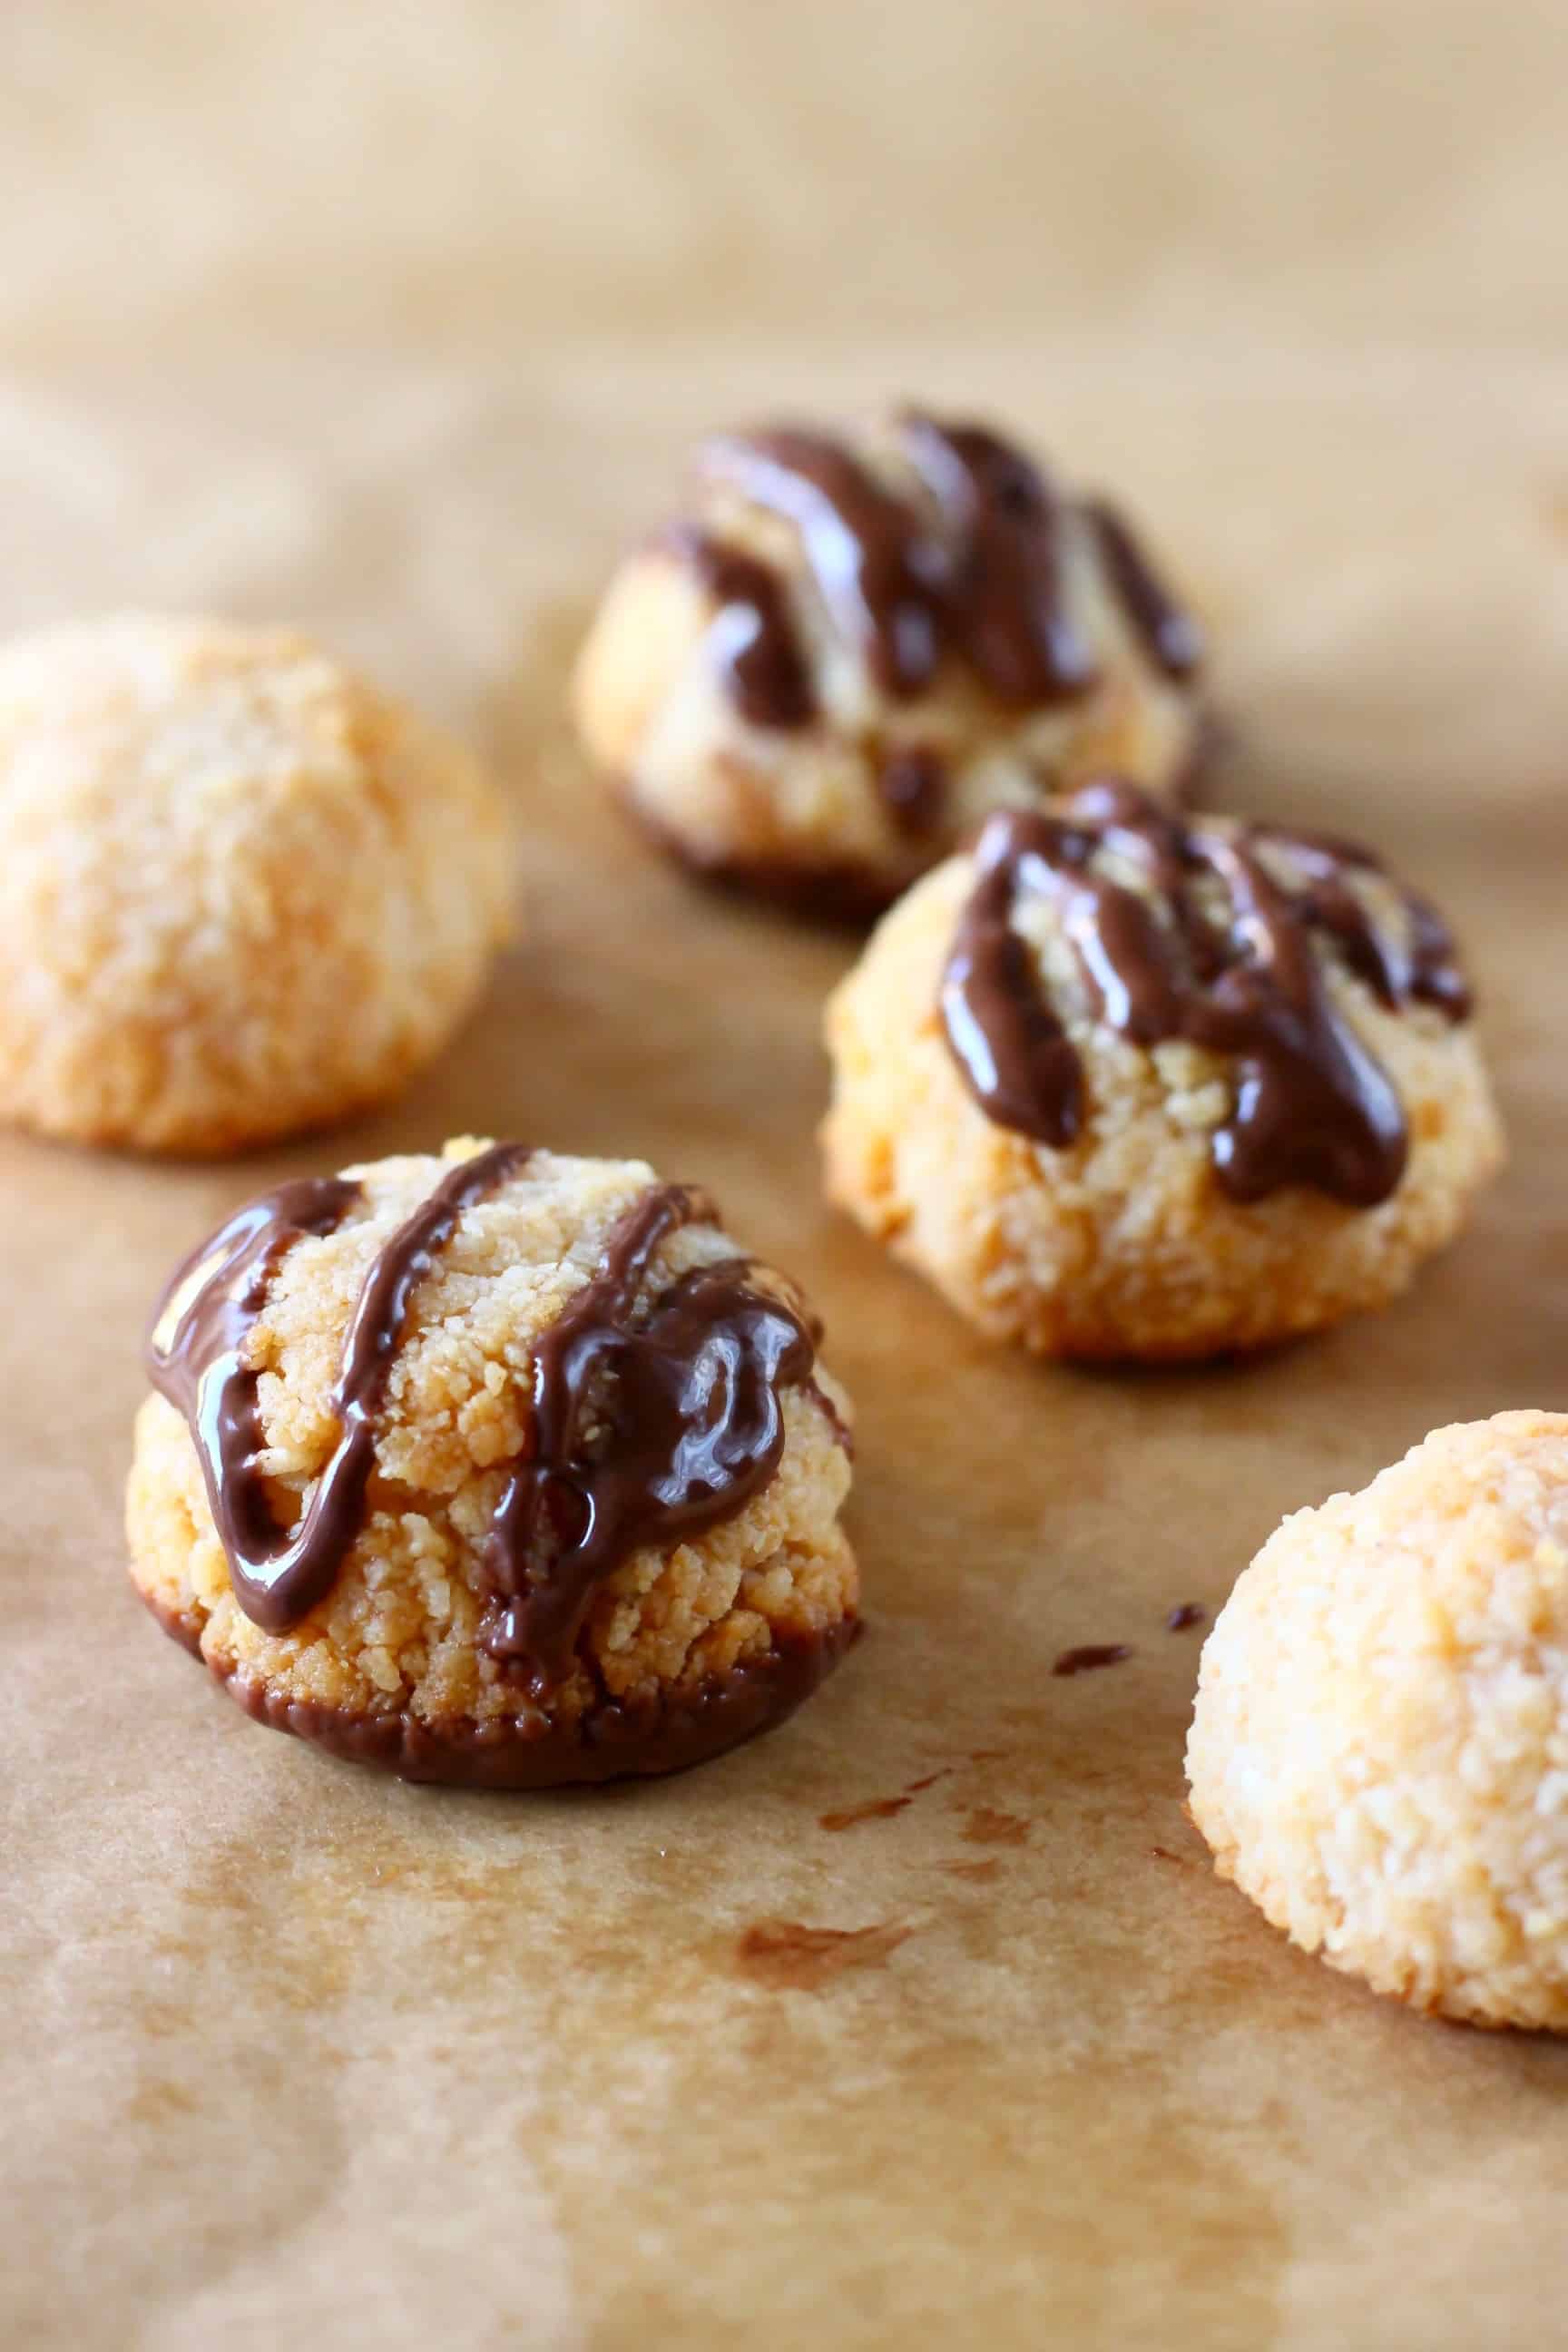 Five vegan macaroons drizzled with melted chocolate on a sheet of brown baking paper